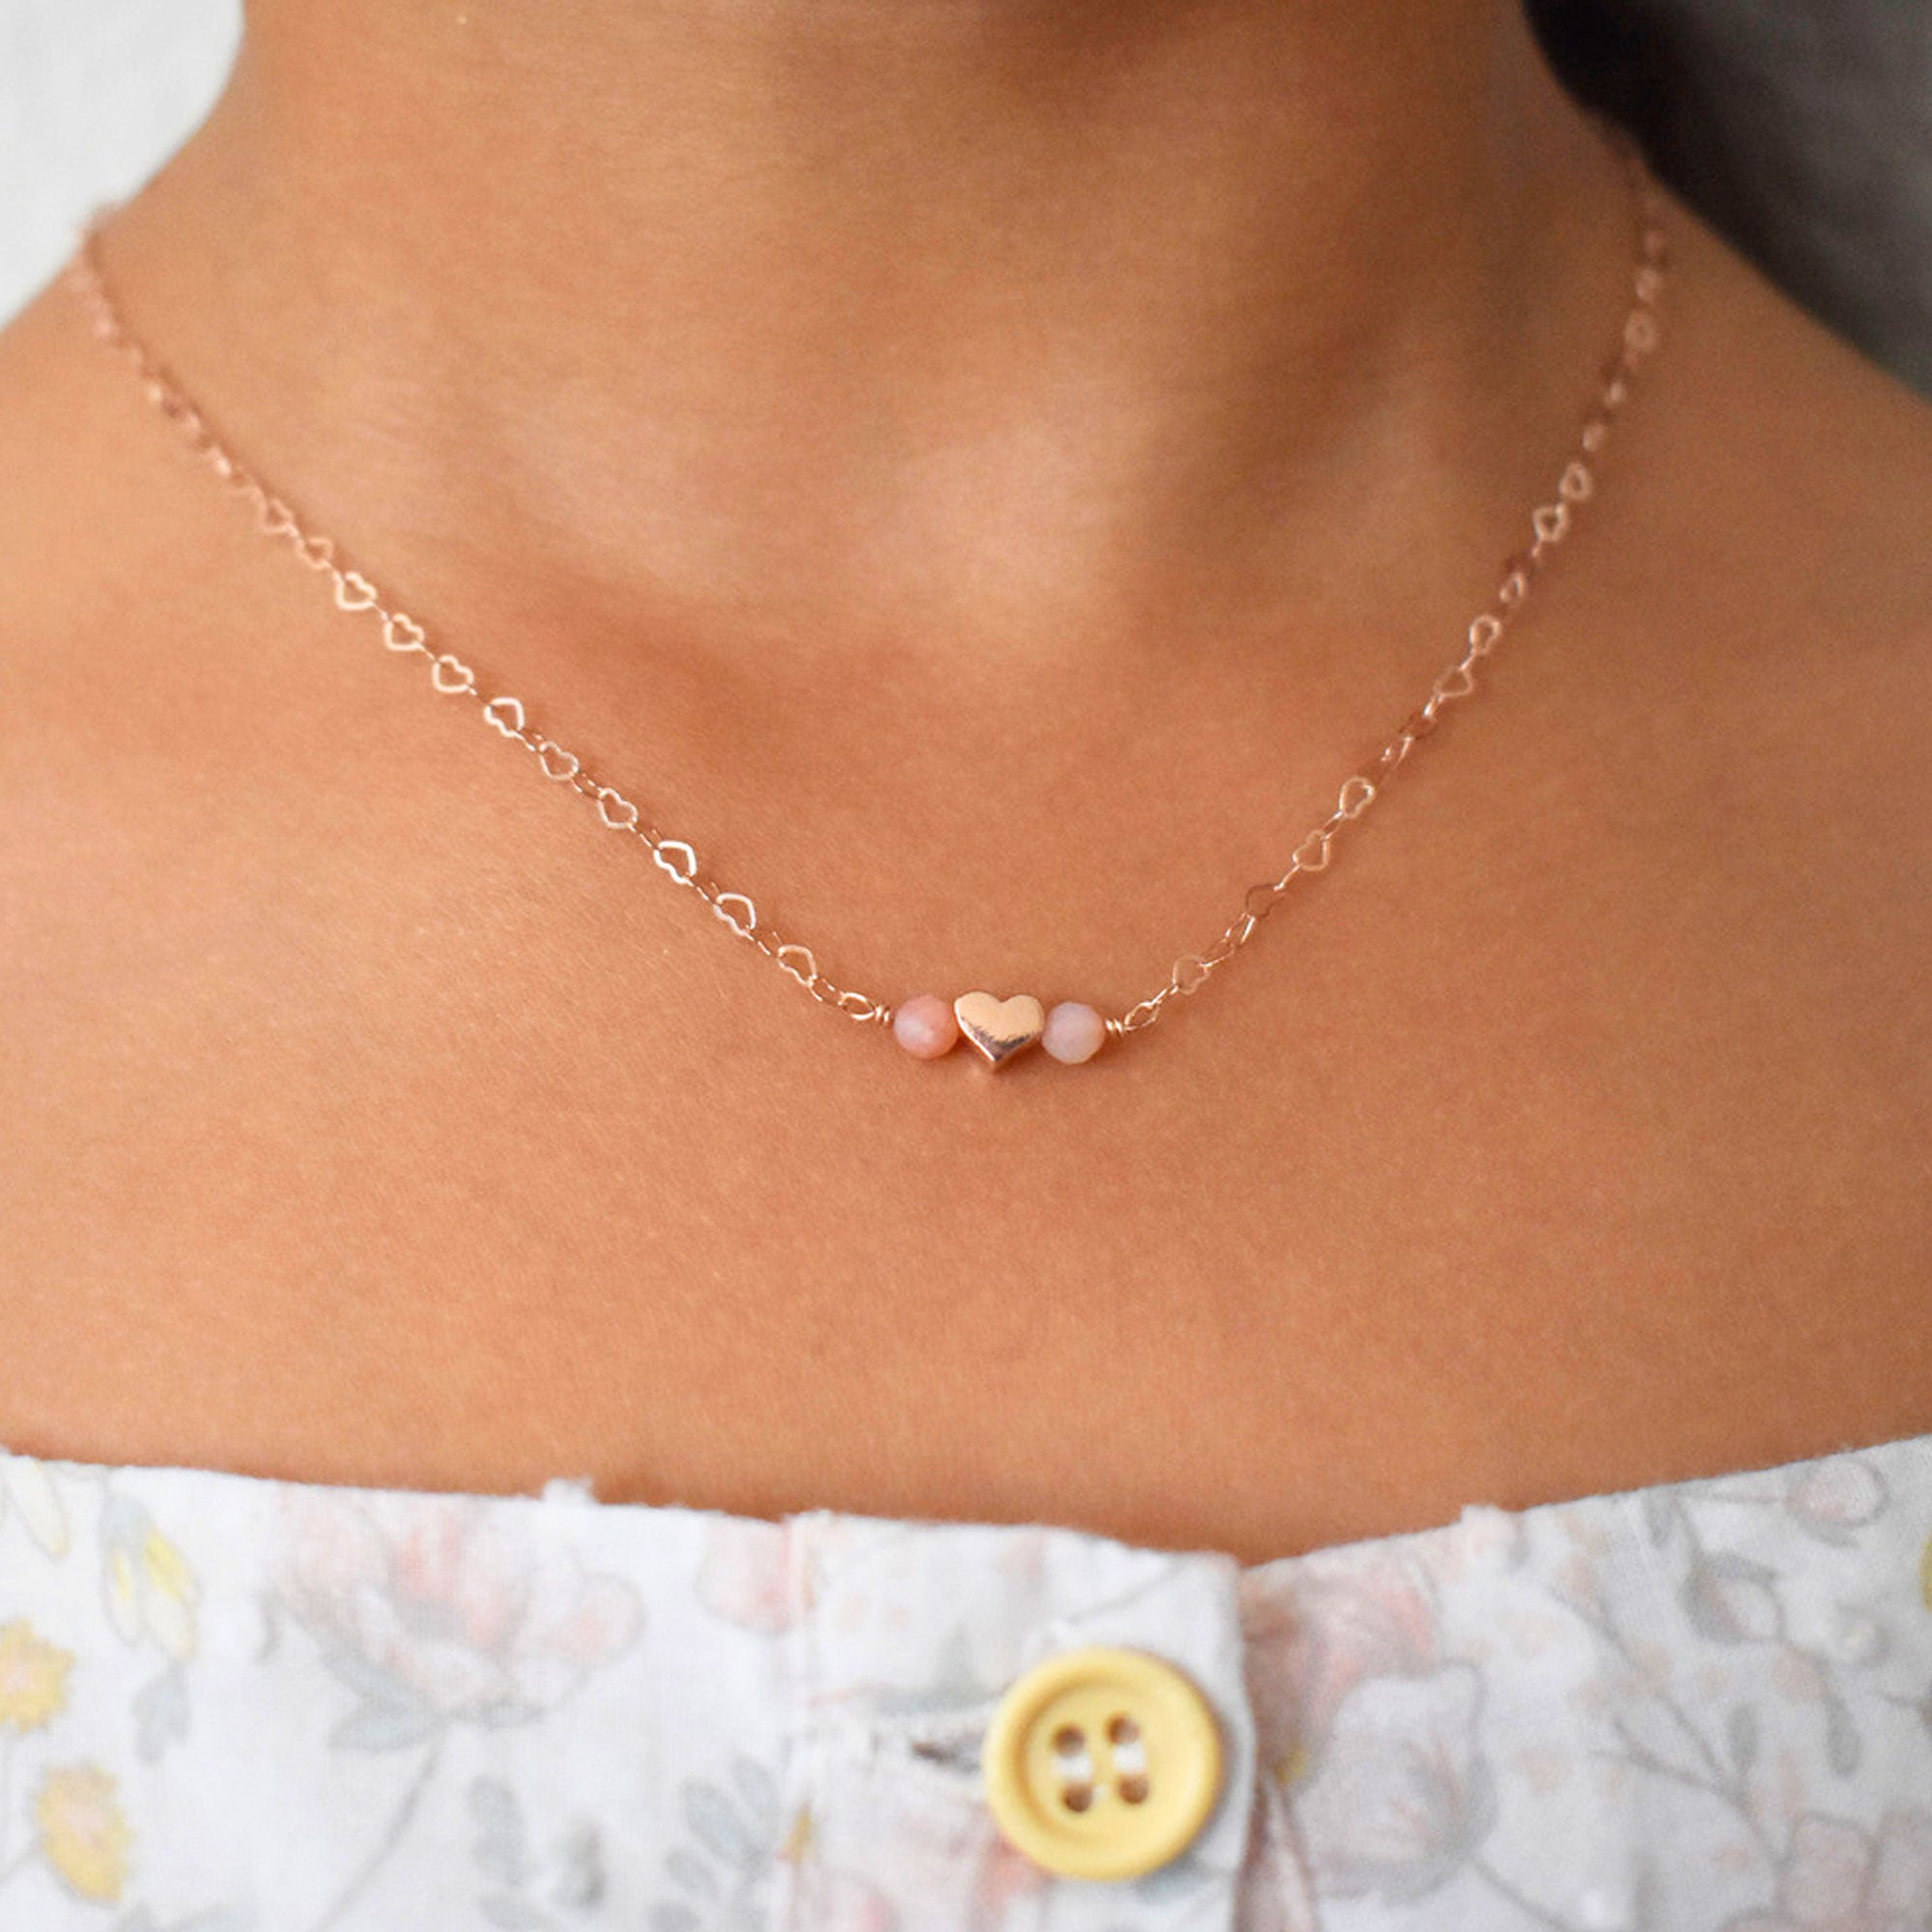 Girls heart necklace with pink opal, aquamarine or rainbow moonstones